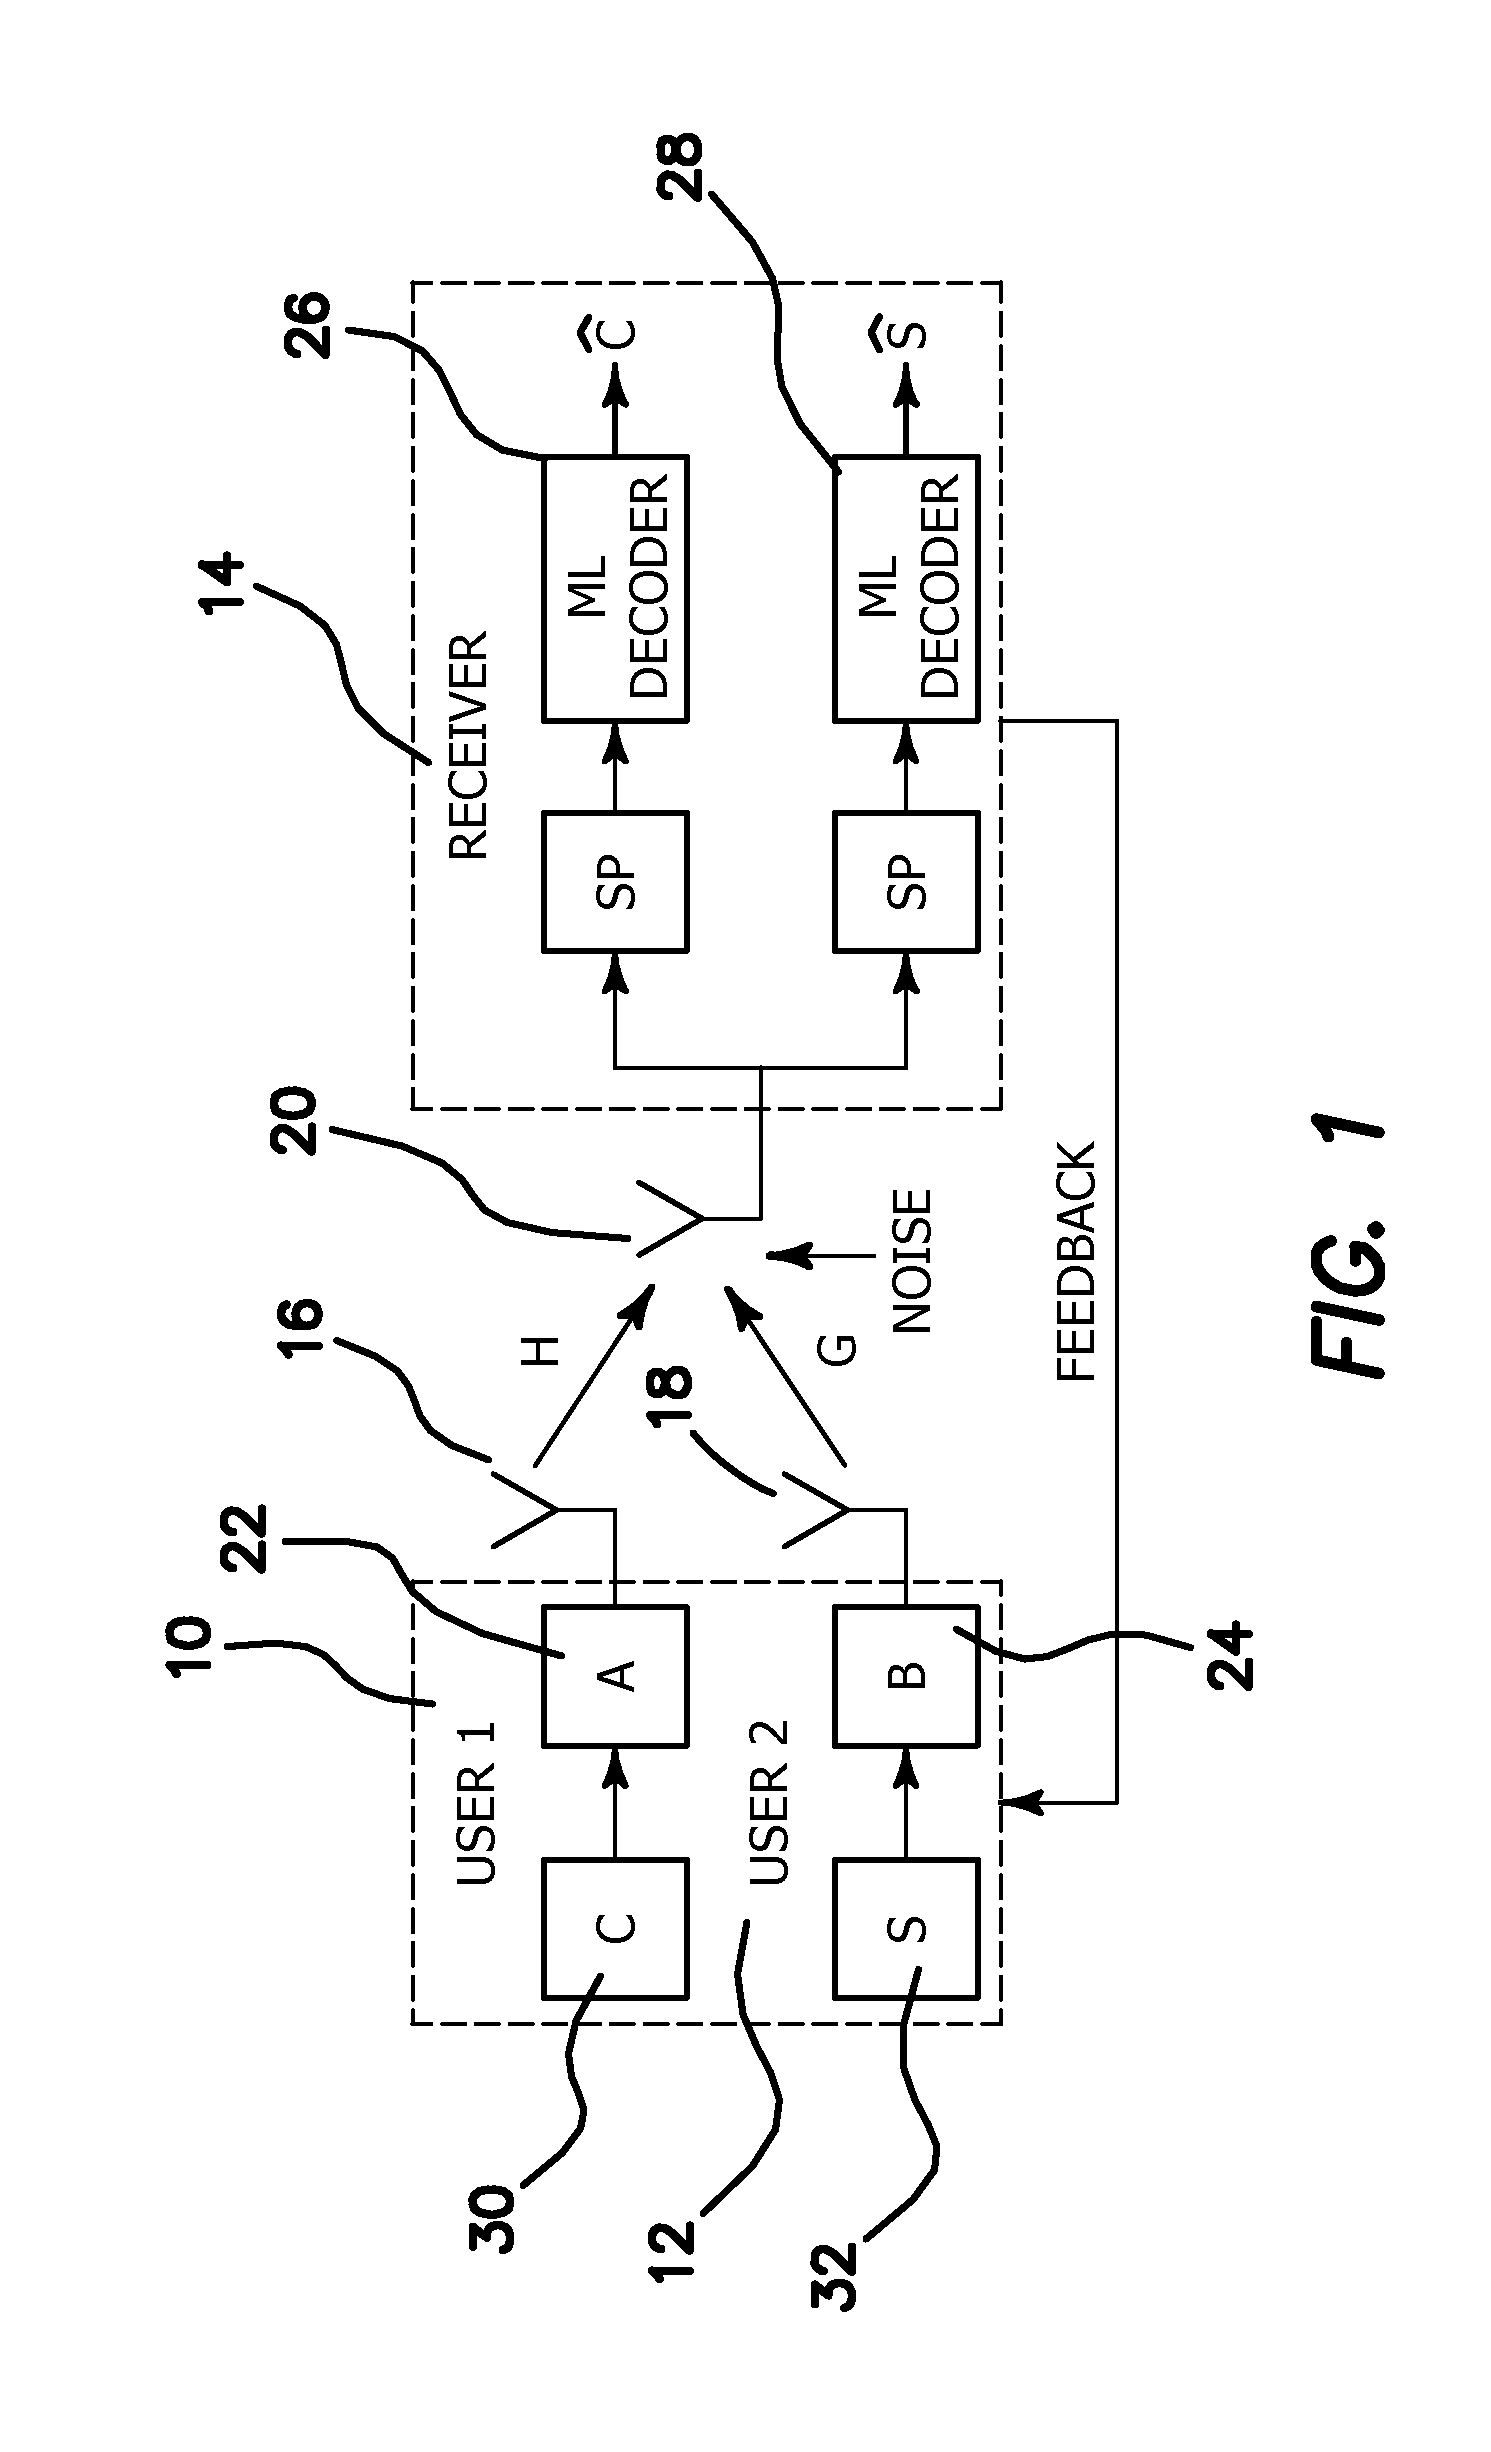 Method and apparatus for interference cancellation and detection using precoders